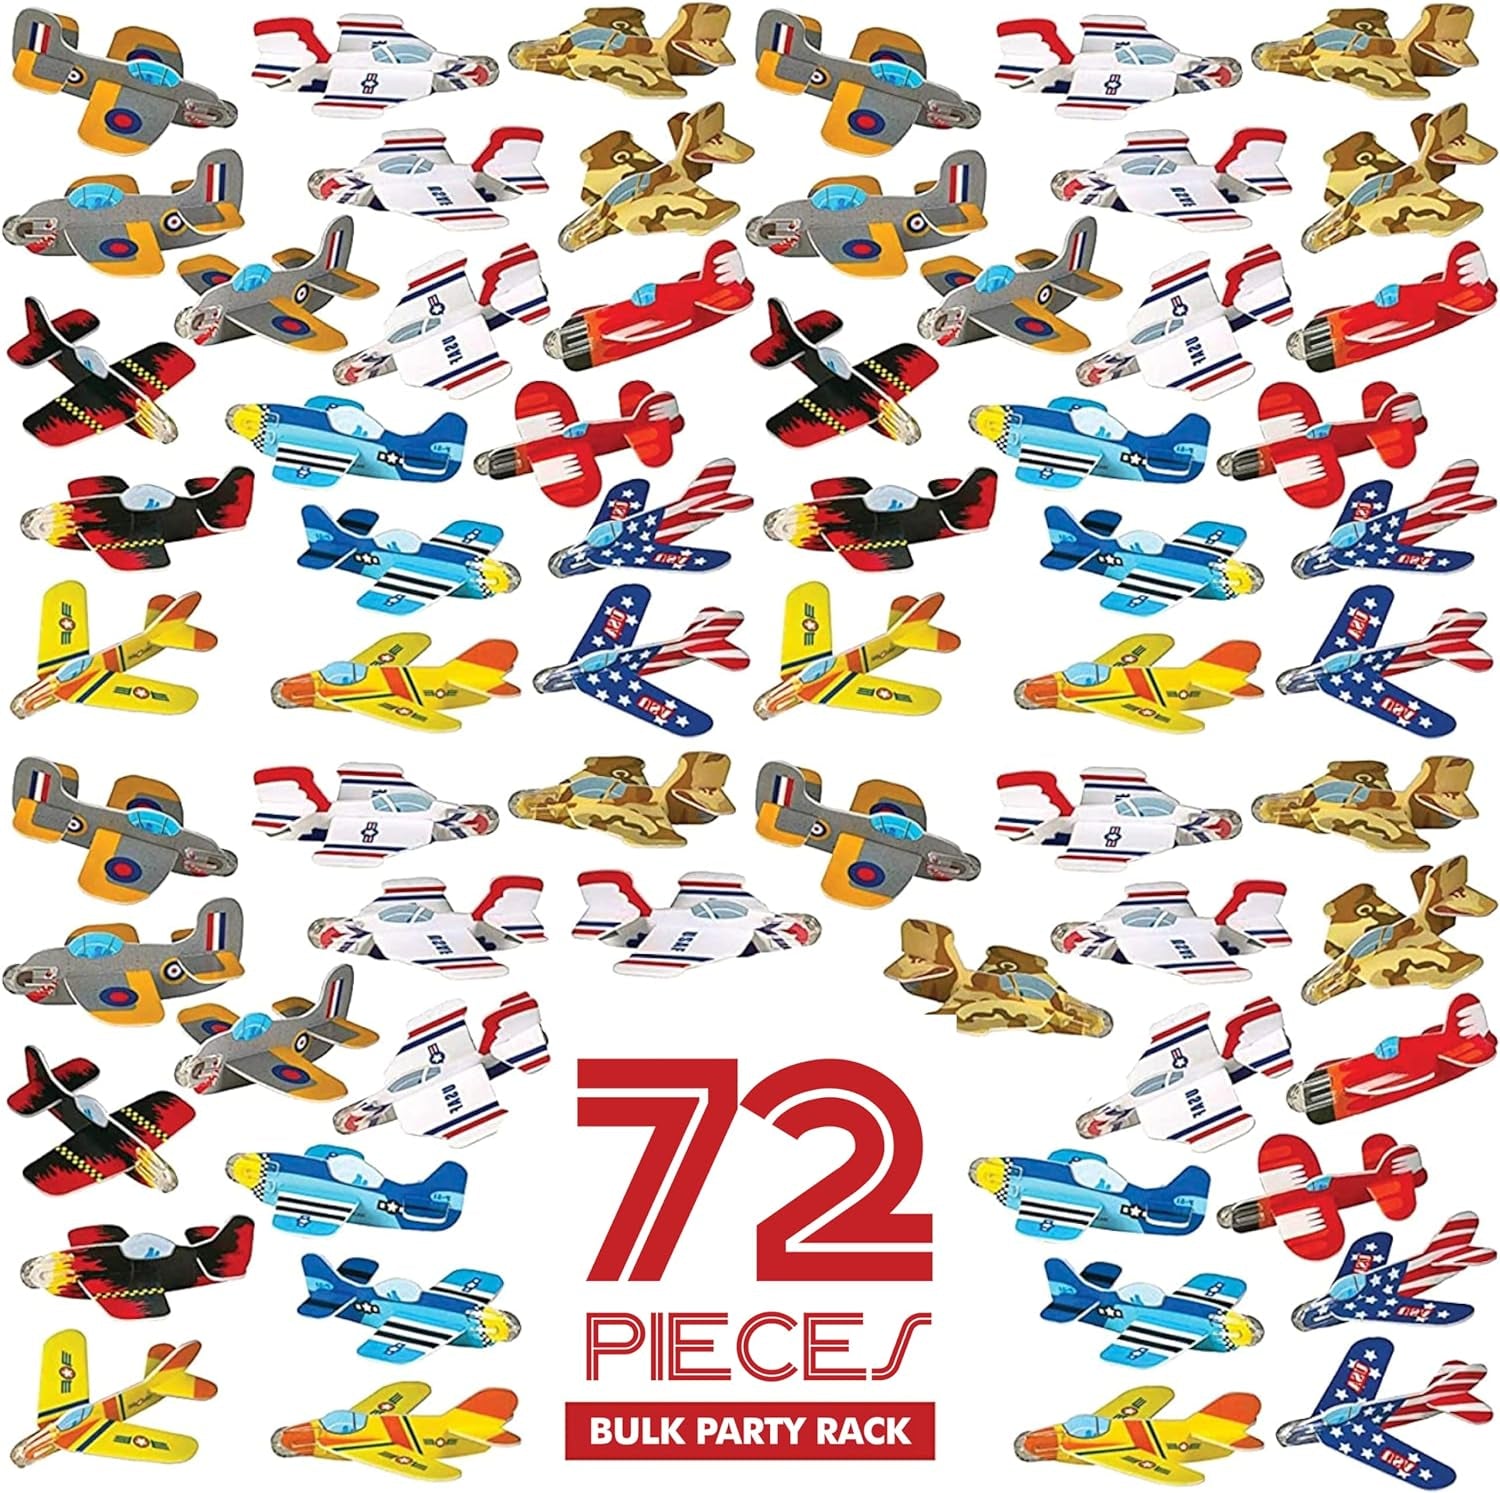 Bulk Pack of 72 Airplane Gliders Party Favors for Kids - Party Pack Individually Wrapped Flying Paper Planes – Assorted Designs - for Rewards and Prizes, Pinata Fillers, Carnival Prizes